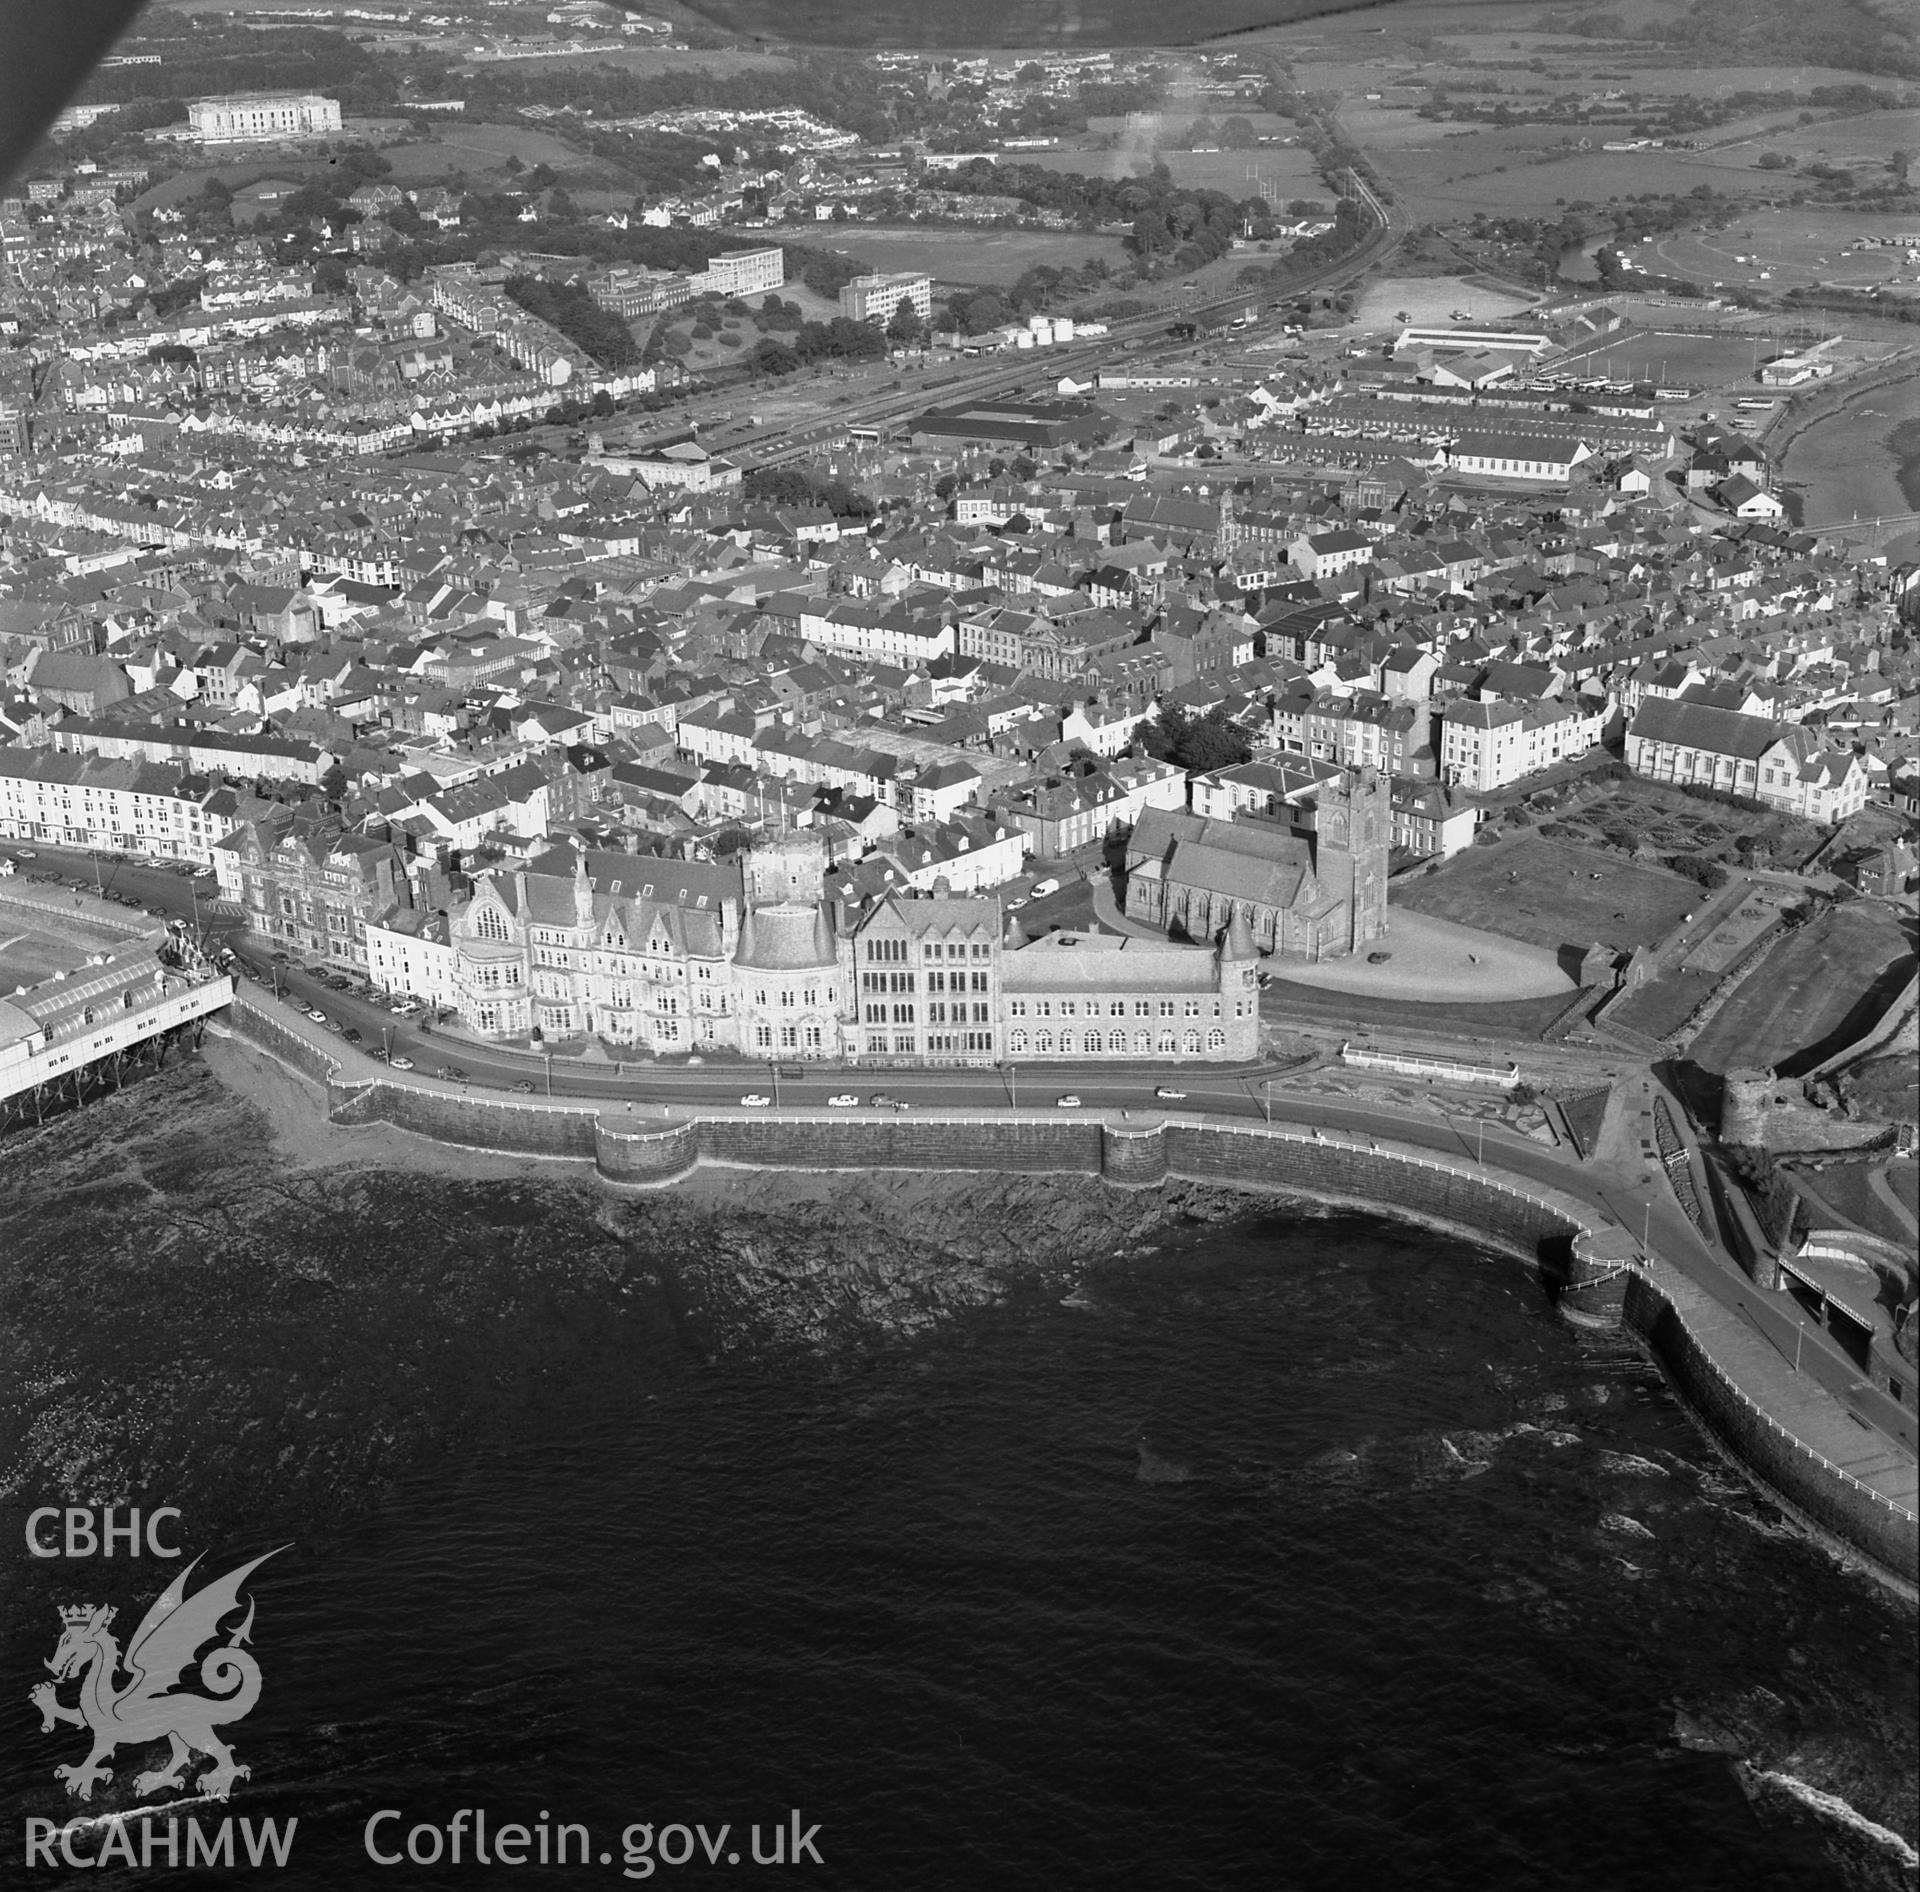 RCAHMW Black and white oblique aerial photograph of Old College (Castle House Hotel), Aberystwyth, taken by CR Musson on 24/06/88